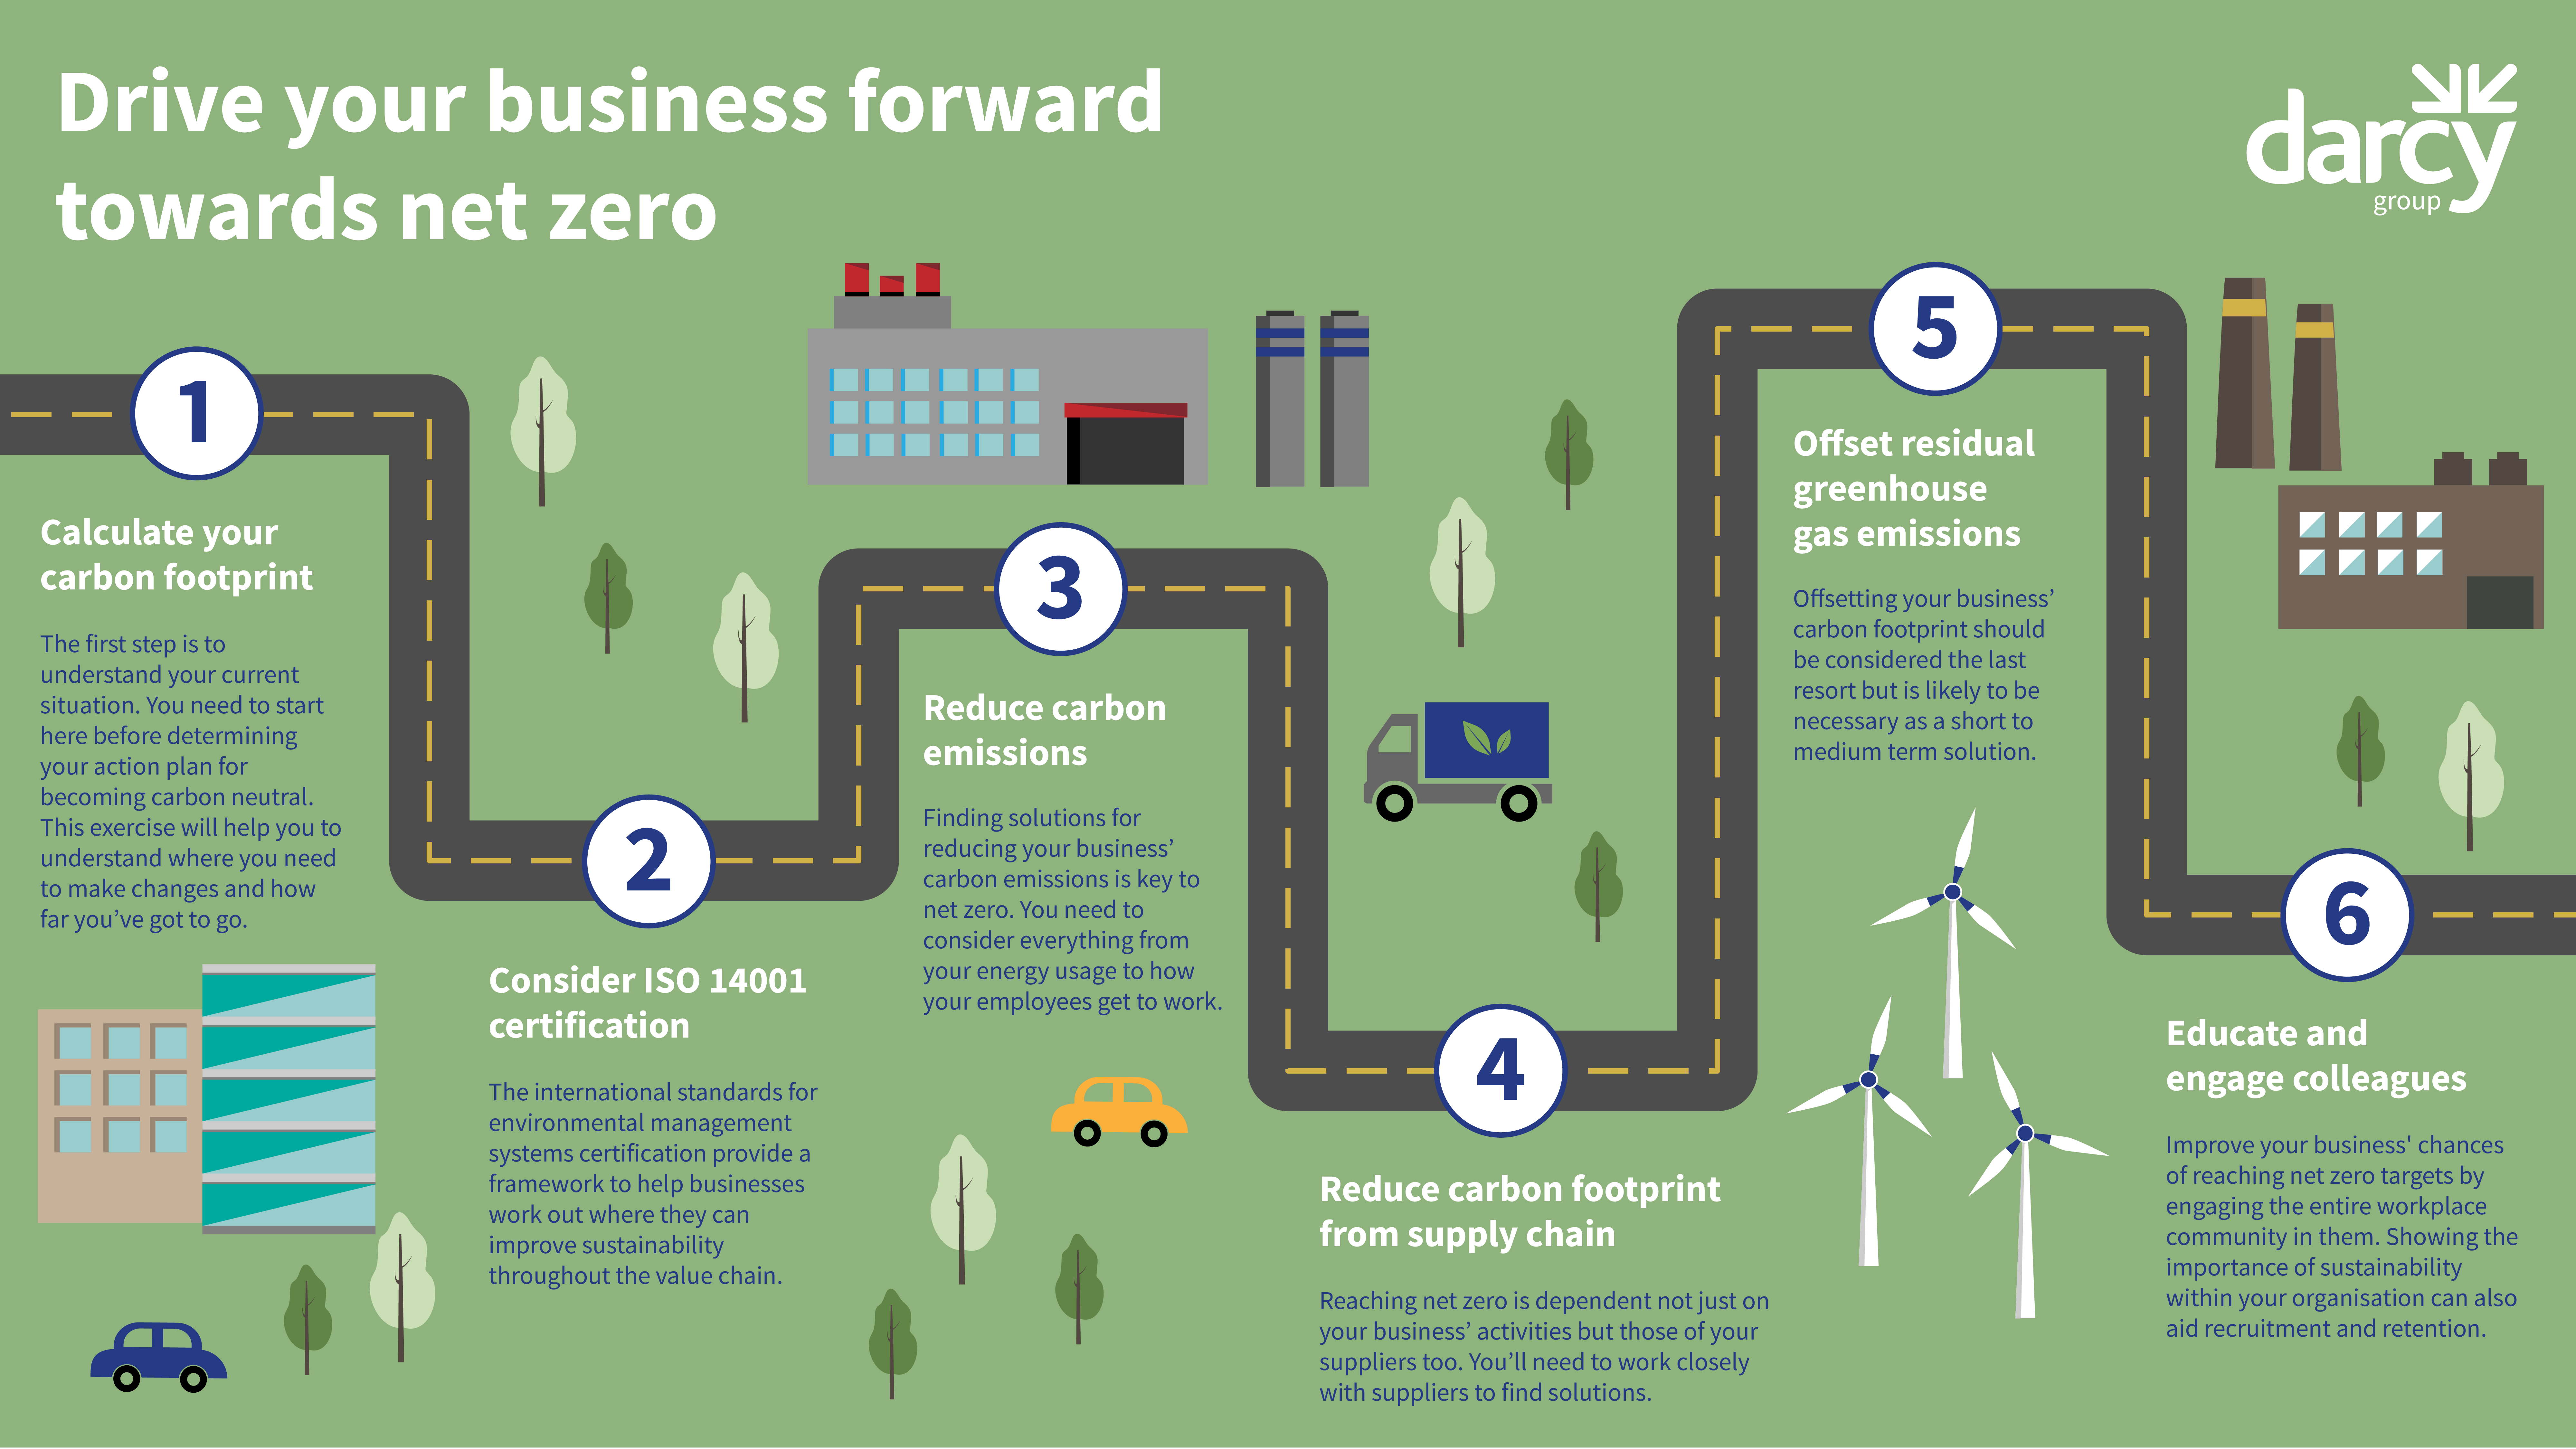 How to drive your business forward towards net zero & bypass overwhelm